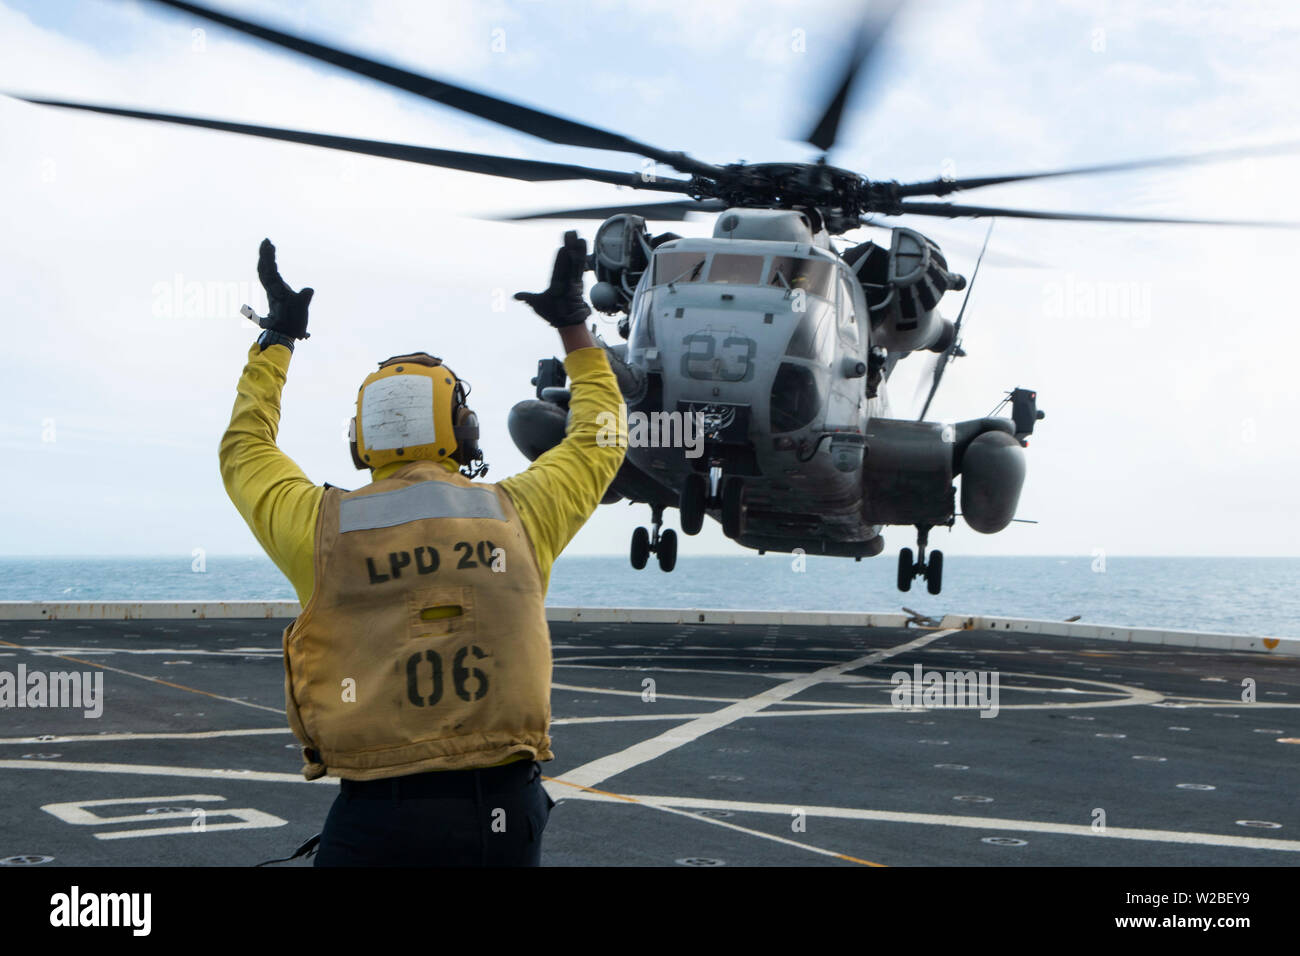 https://c8.alamy.com/comp/W2BEY9/190707-n-dx072-1259-coral-sea-july-7-2019-aviation-boatswains-mate-handling-3rd-class-deon-sanders-from-new-york-signals-to-a-ch-53e-super-stallion-helicopter-assigned-to-the-31st-marine-expeditionary-unit-meu-dragons-of-marine-medium-tiltrotor-squadron-vmm-265-reinforced-as-it-takes-off-from-the-flight-deck-of-the-amphibious-transport-dock-ship-uss-green-bay-lpd-20-during-a-visit-board-search-and-seizure-vbss-drill-with-the-amphibious-dock-landing-ship-uss-ashland-lsd-48-green-bay-and-ashland-part-of-the-wasp-amphibious-ready-group-with-embarked-31st-meu-are-oper-W2BEY9.jpg